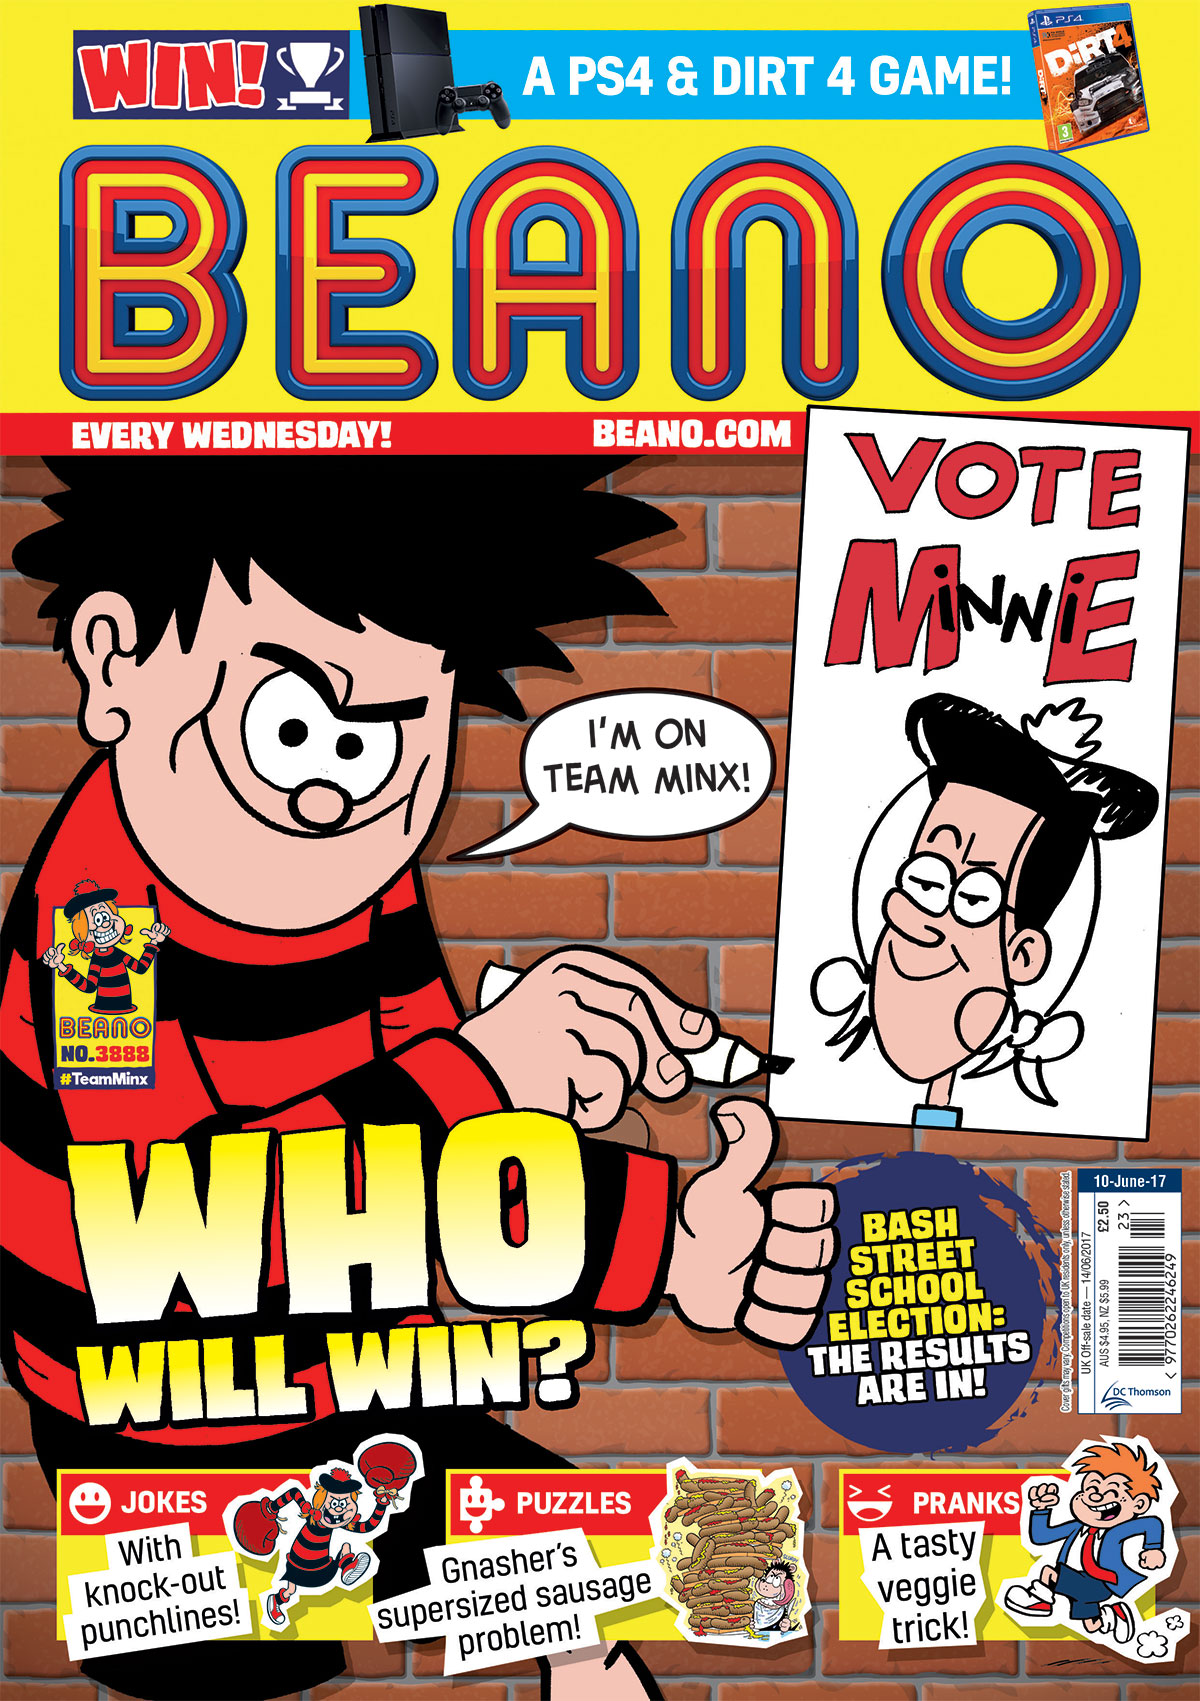 Beano No. 3888, June 10th 2017, Dennis the Menace and Gnasher, election, Bash Street